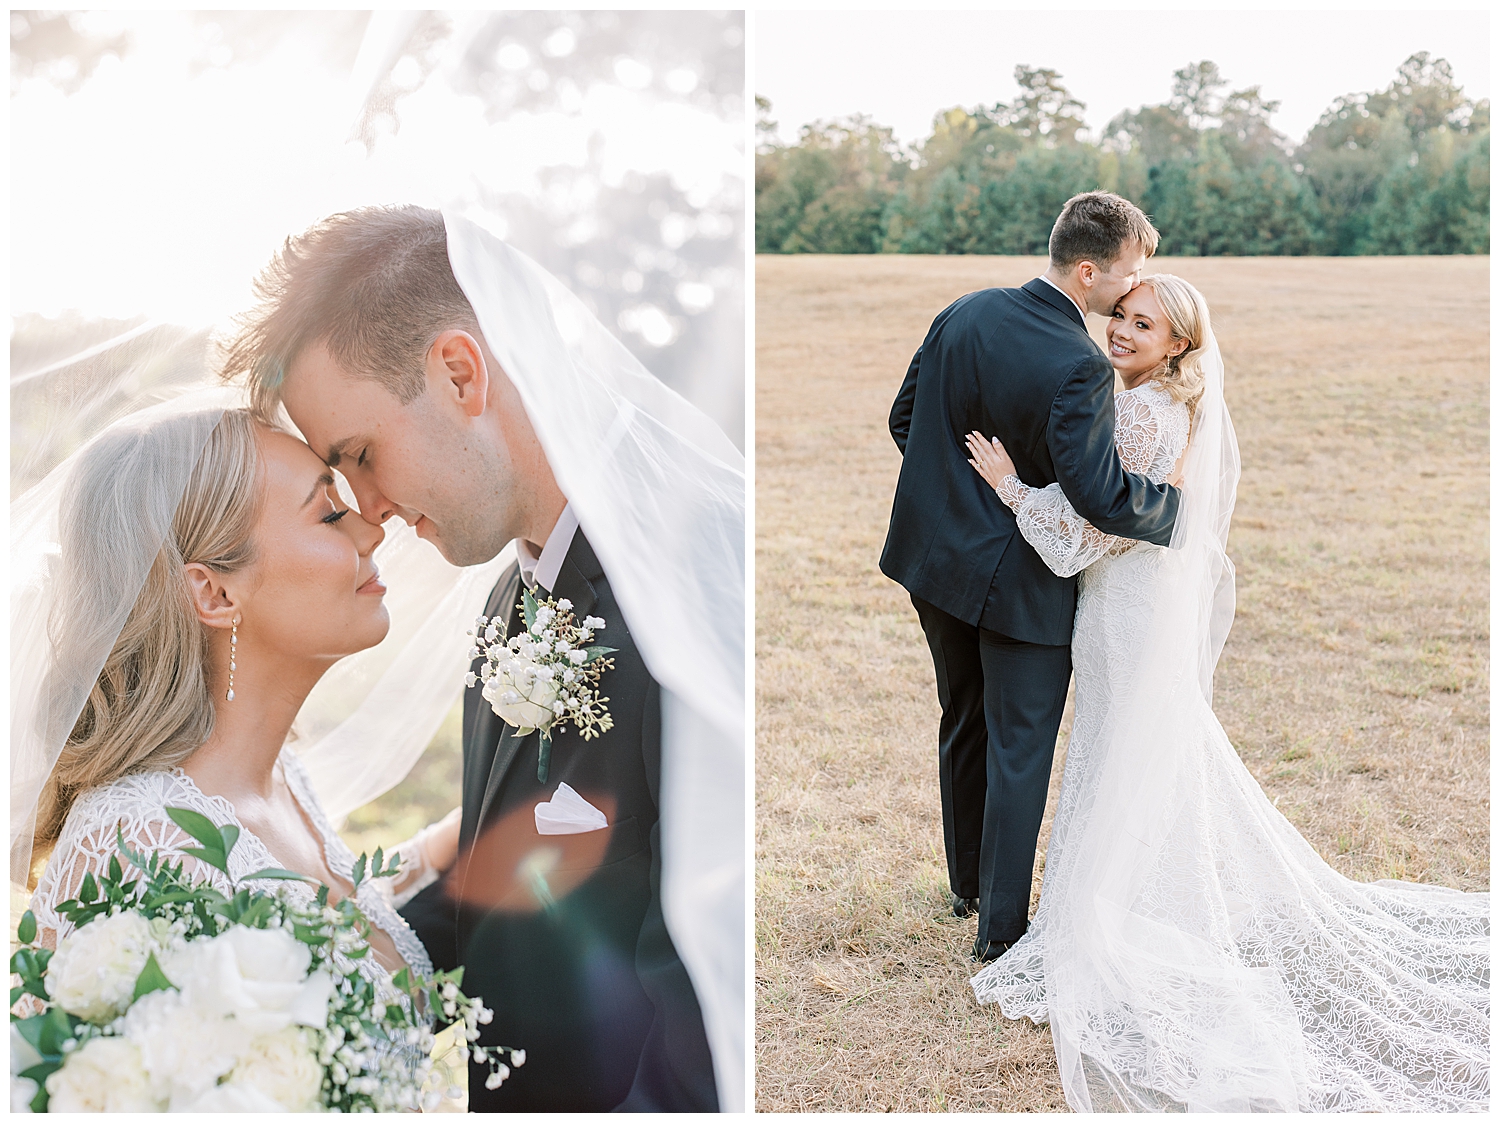 Juliann Riggs Photography captures sunset portraits of the newly married couple featured in Signature Magazine.